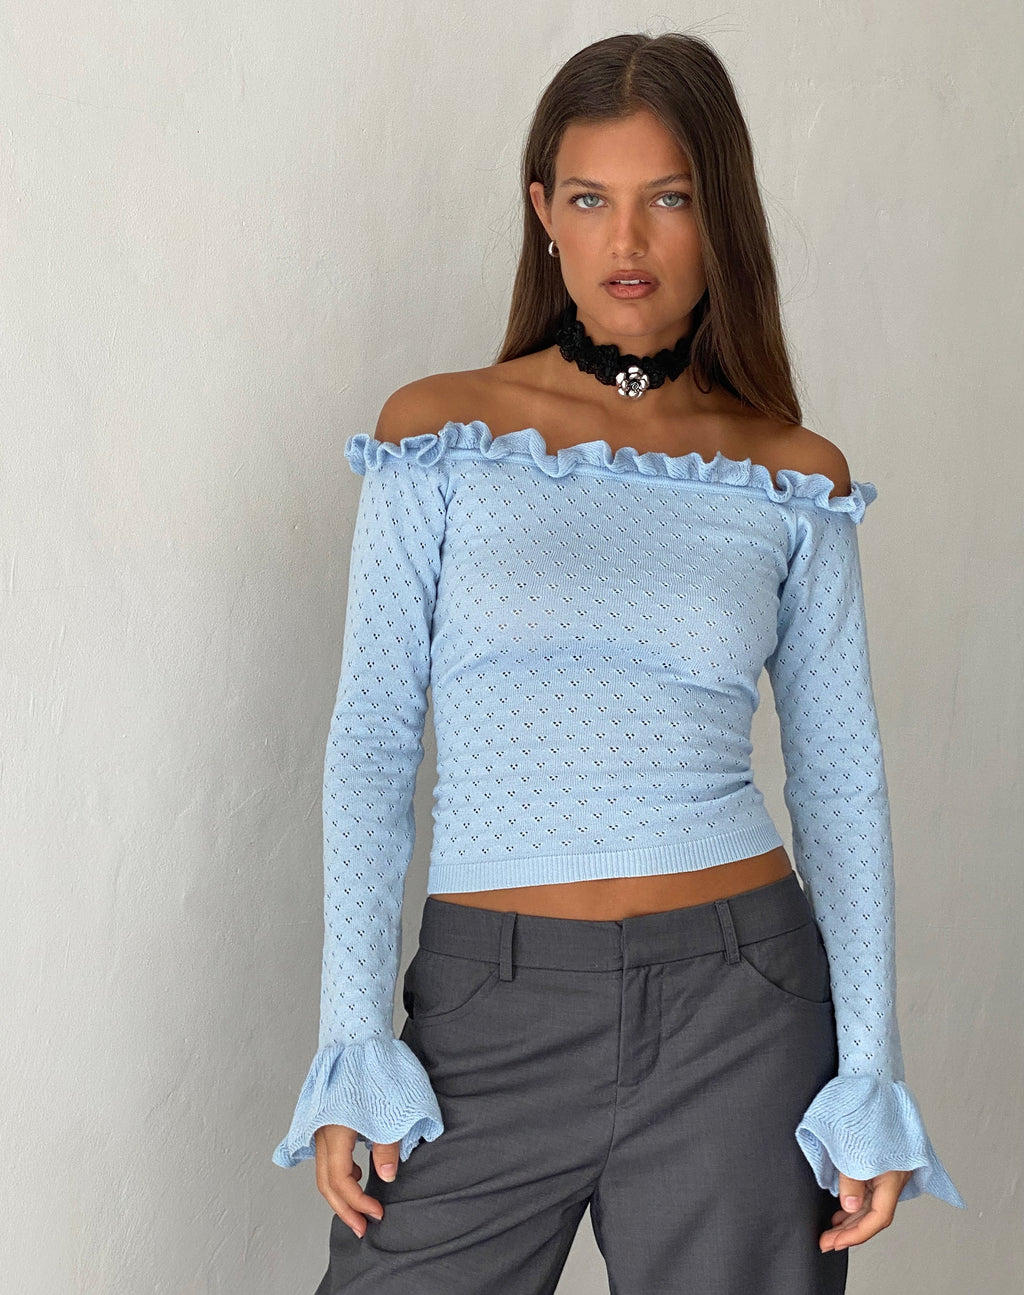 Delaney Knitted Frill Bardot Top in Baby Blue